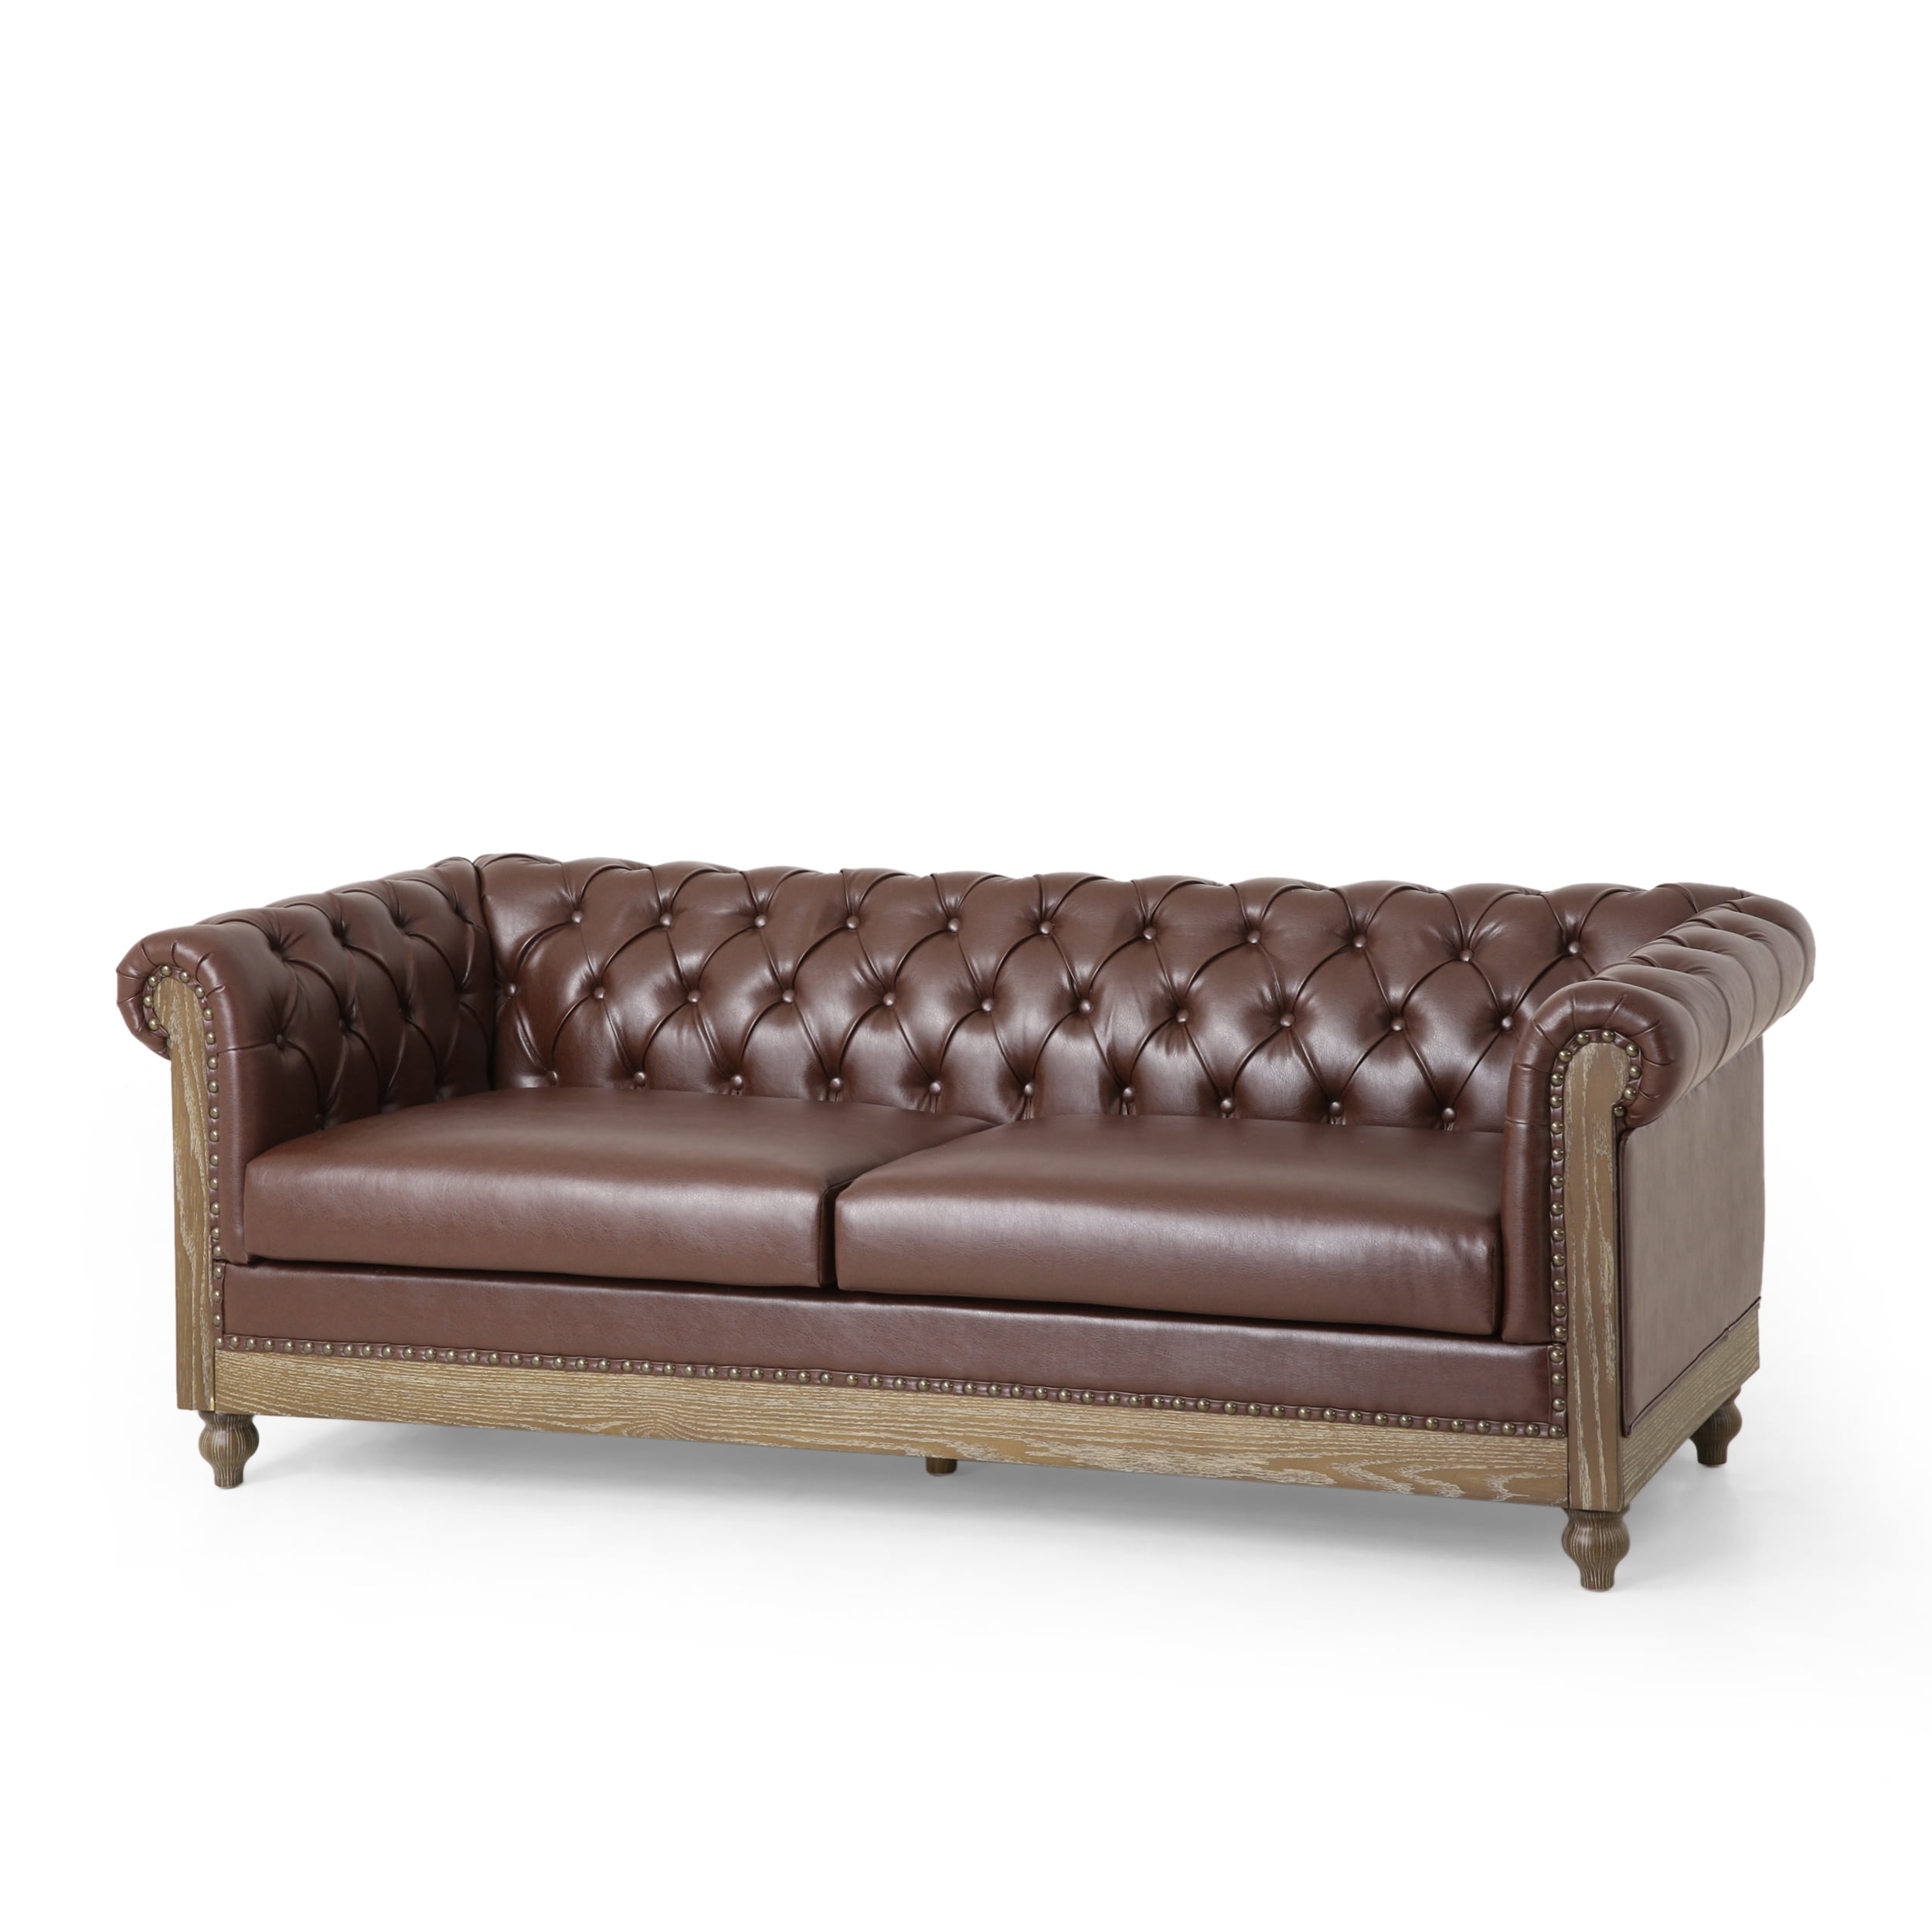 Leather Sofa 3 Seater Nailhead Trim Dark Brown Living Room Couch 